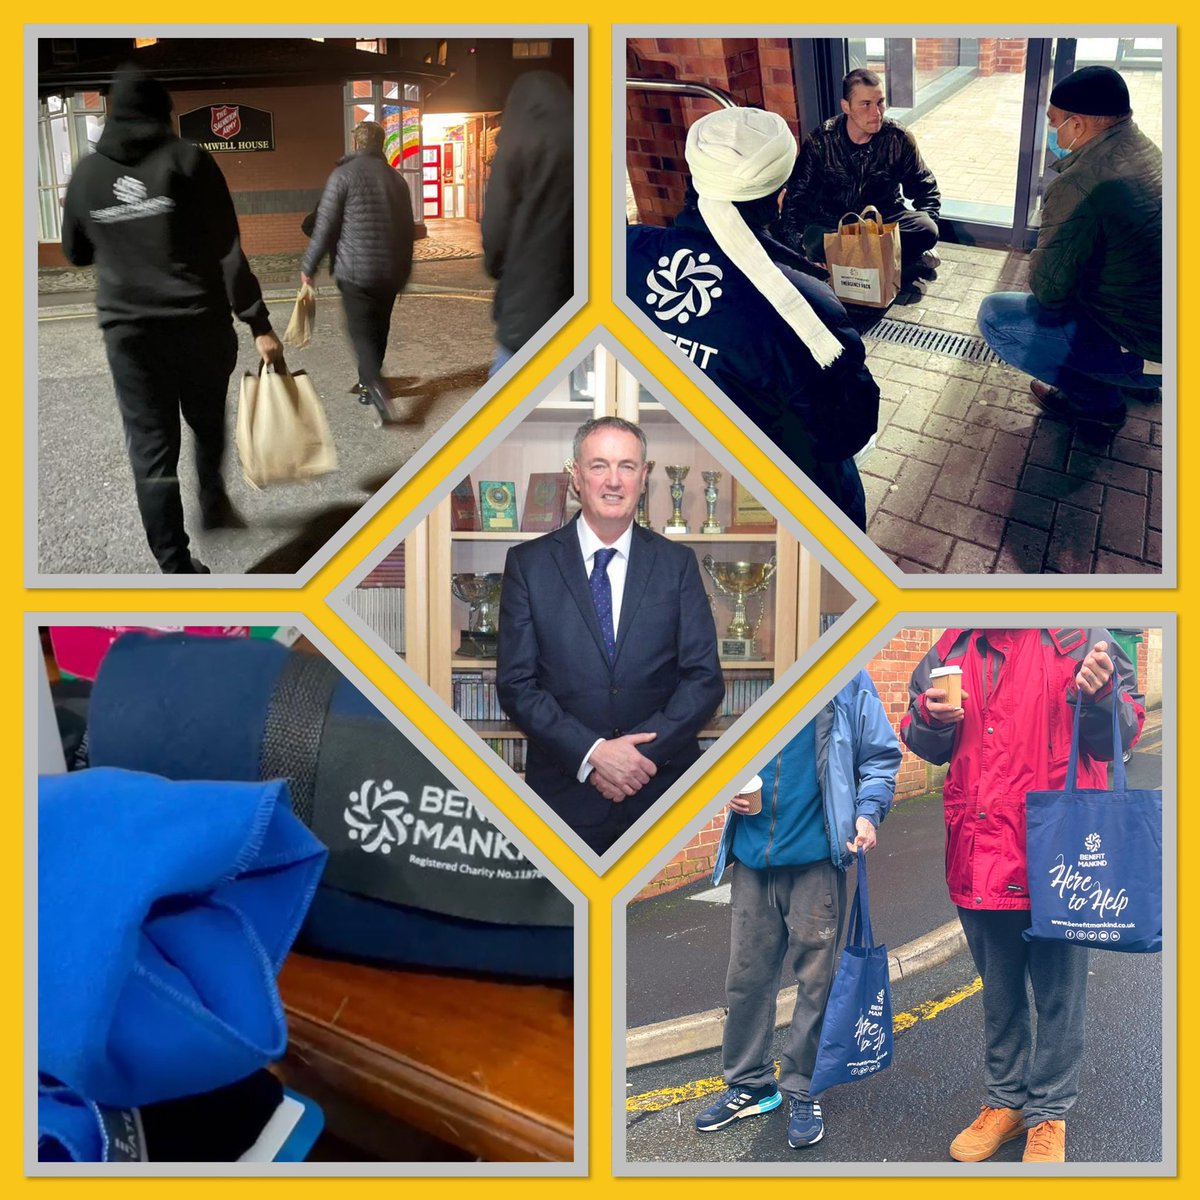 This weekend @Benefit_Mankind & #volunteers delivered to the homeless in #Blackburn #Burnley #Nelson thanks to @LancsPCC for supporting our #WinterWarmth project Thanks to  @pendleradio103 for letting us along with @CliveGrunshaw1 📻 raise awareness! #EndPoverty #StrongerTogether